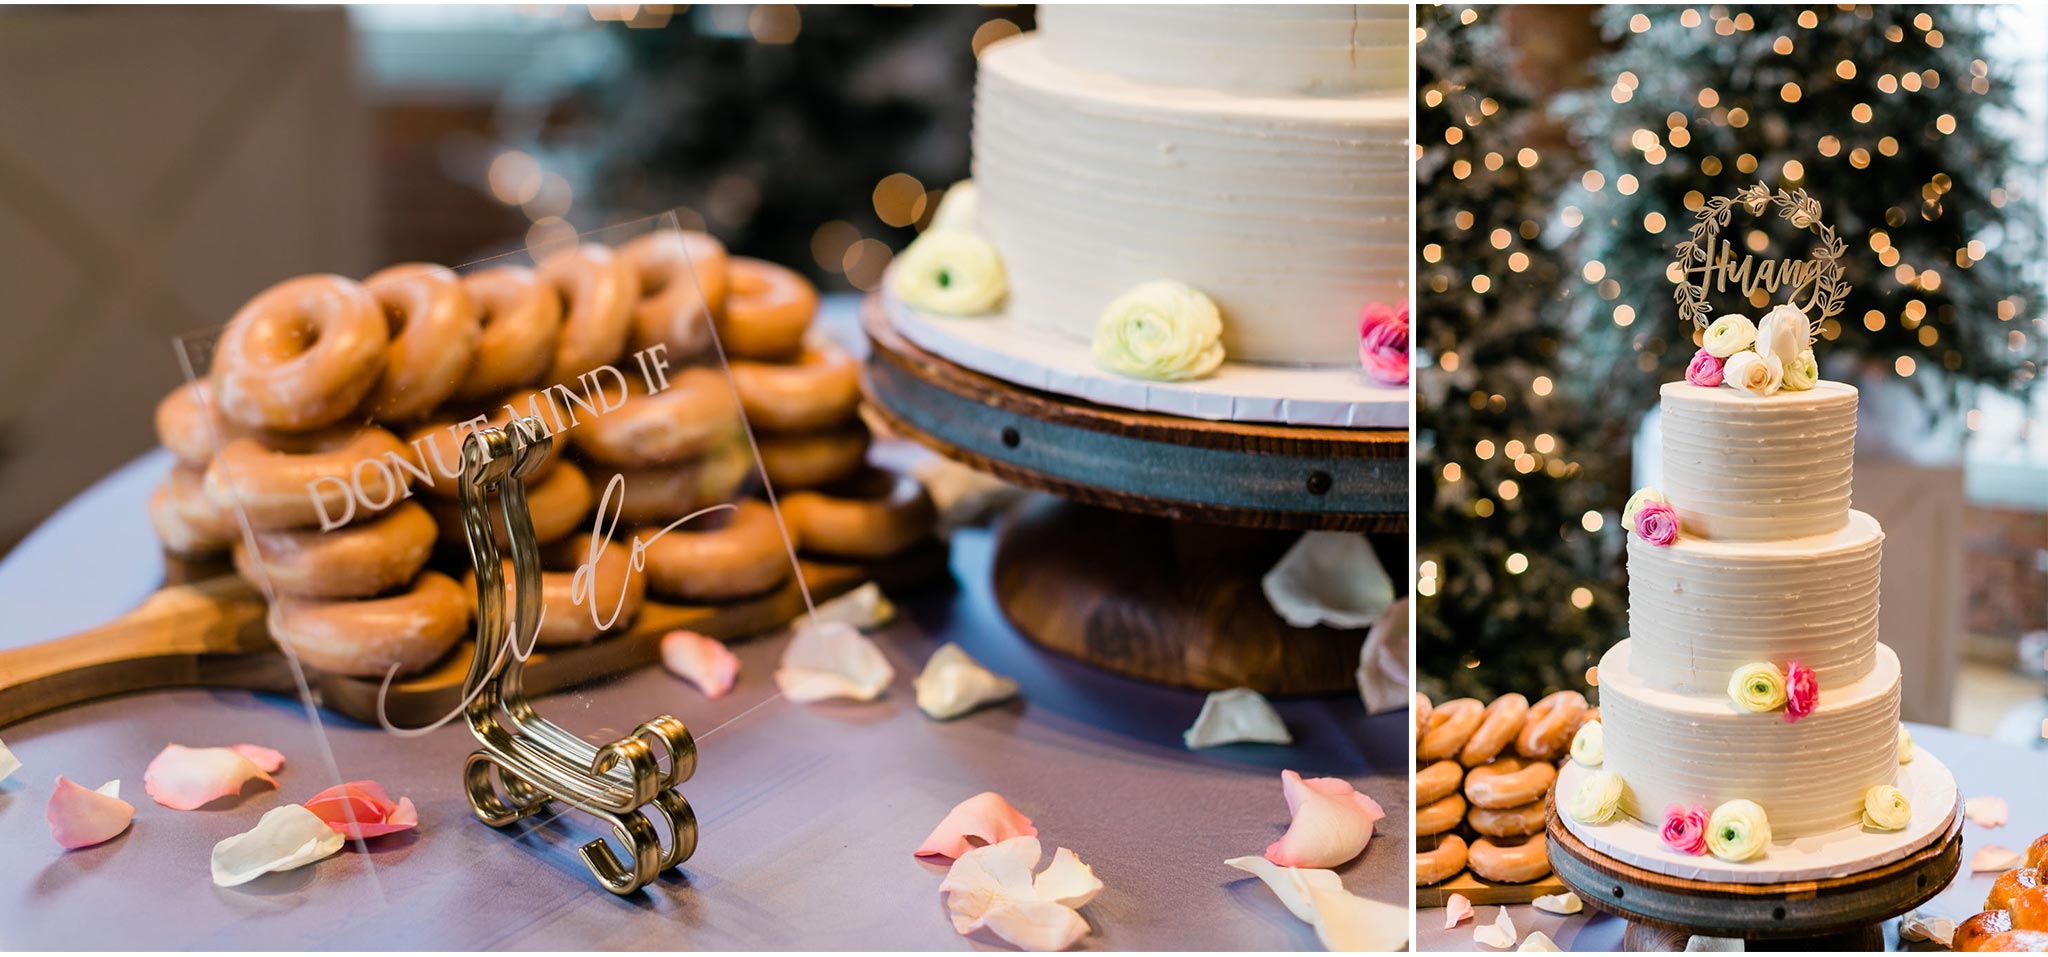 Wedding cake and donuts | Durham Wedding Photographer | The Cotton Room | By G. Lin Photography